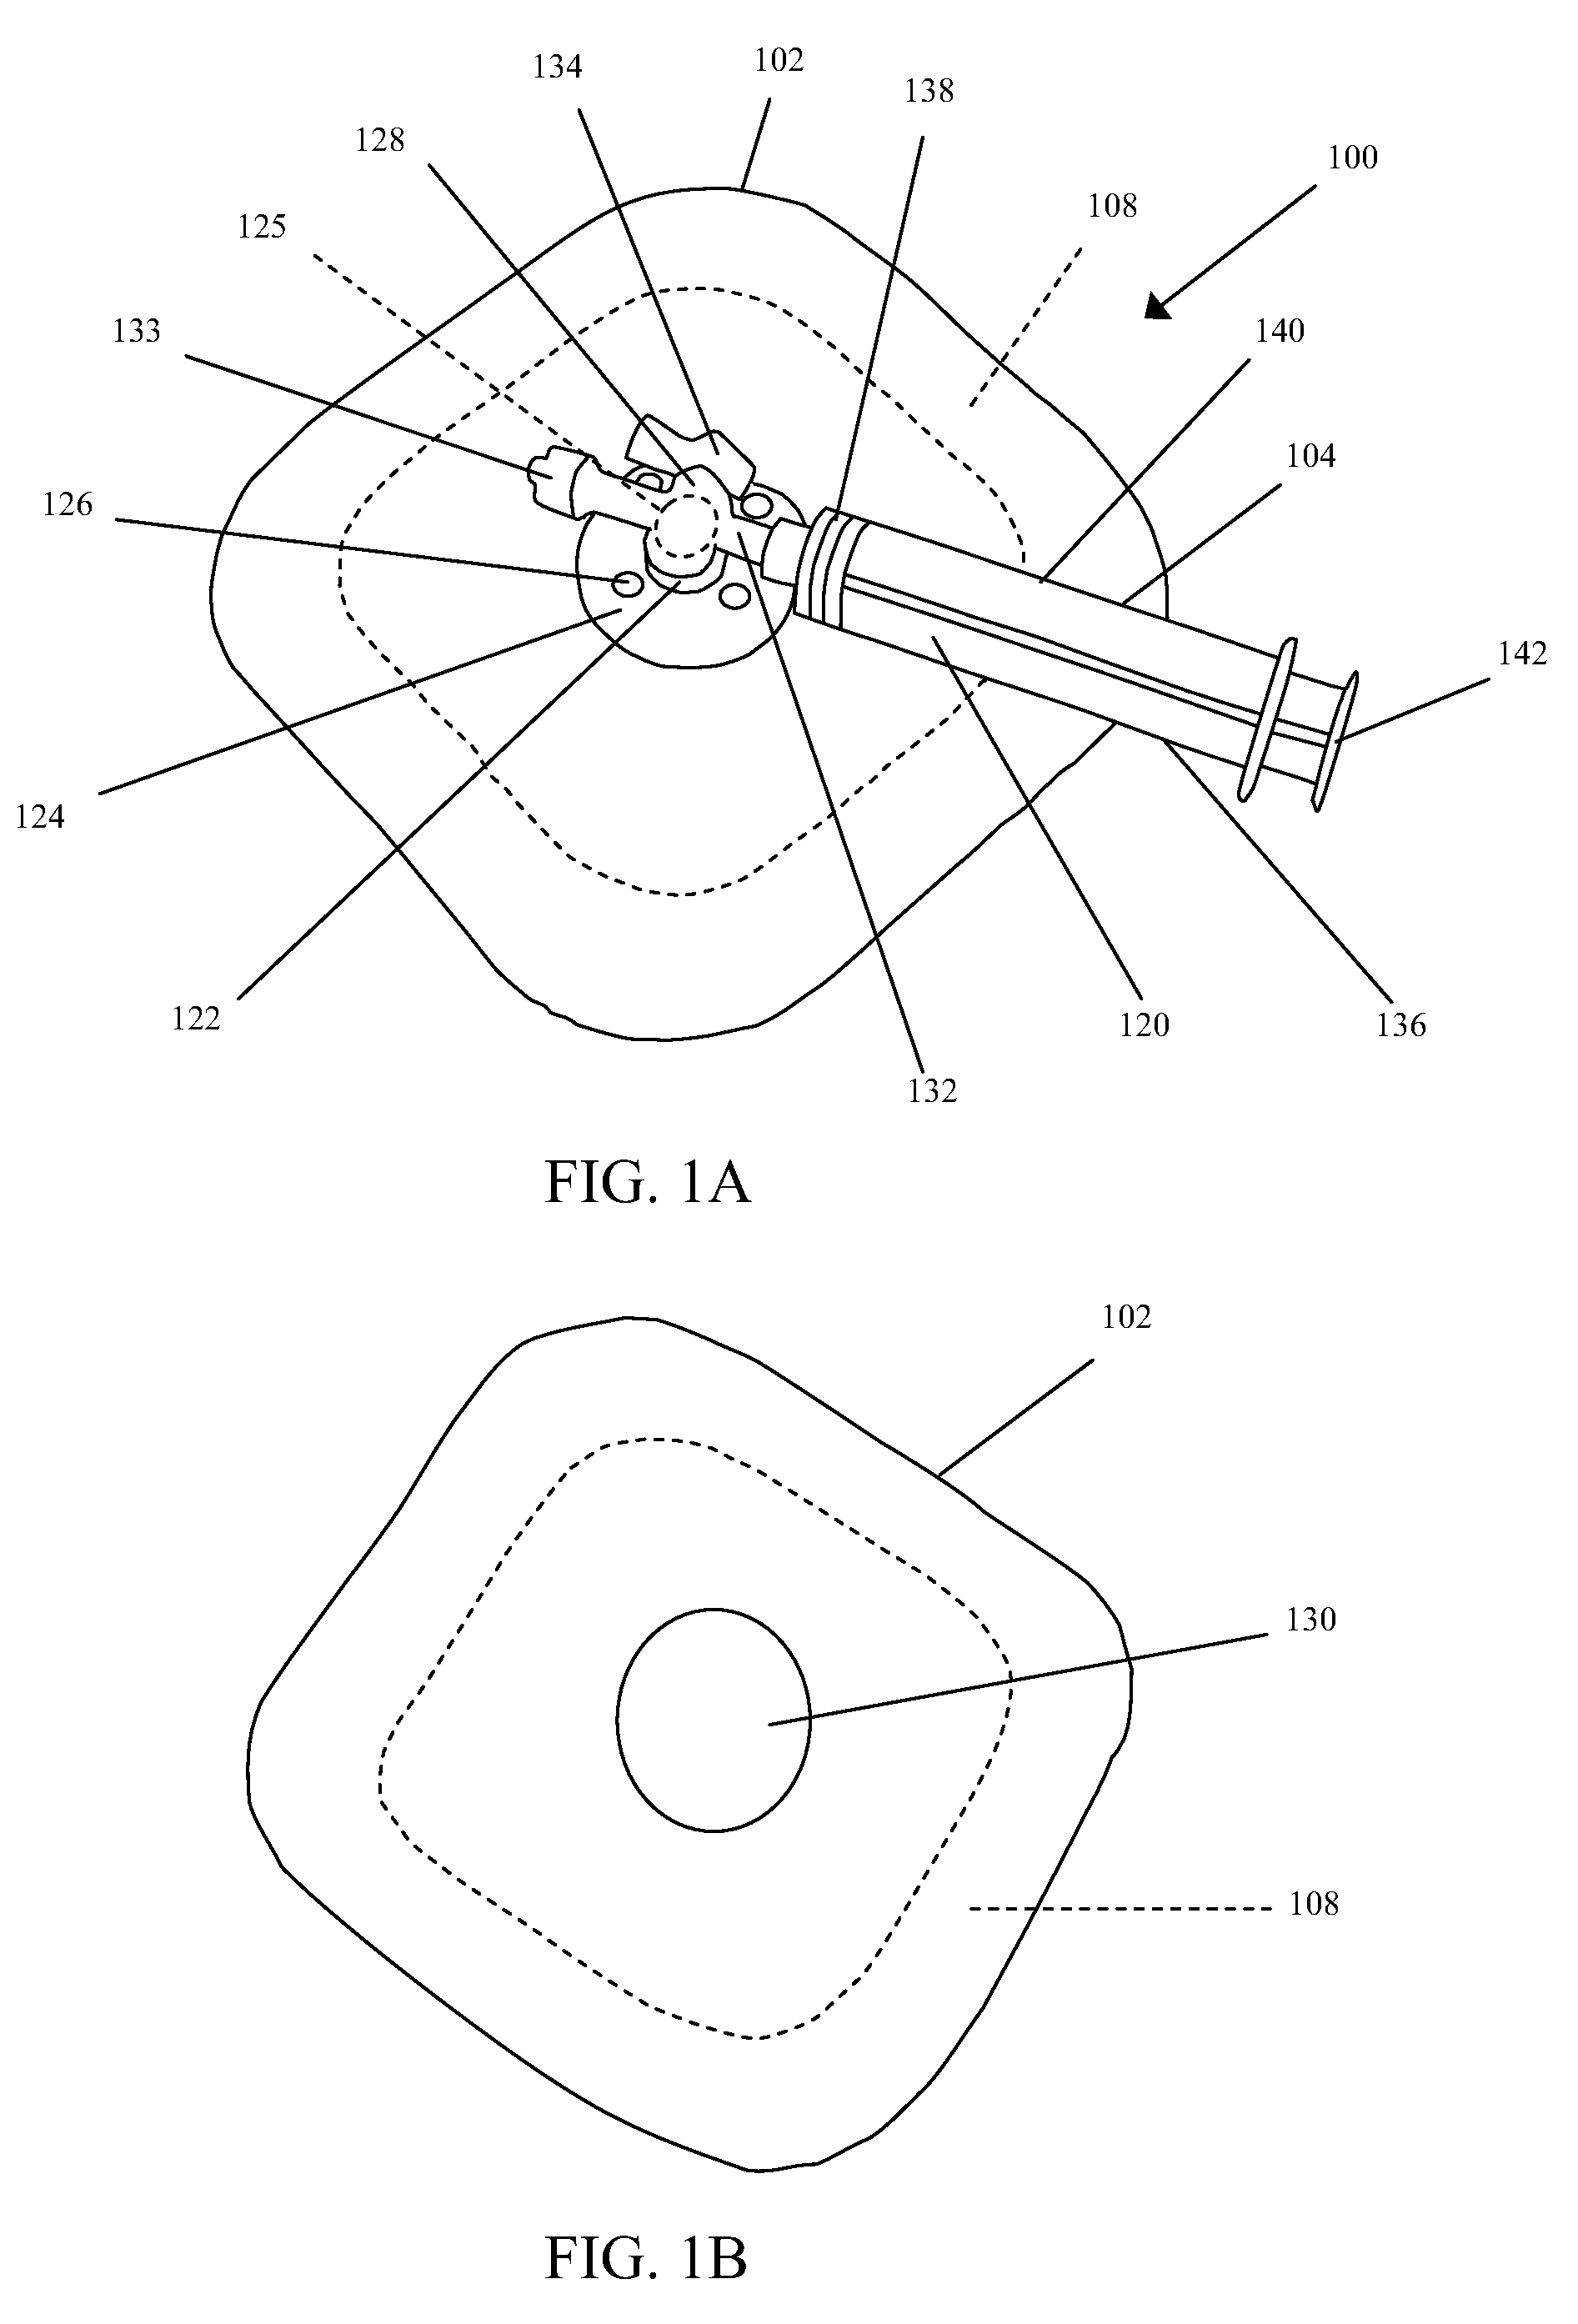 Methods for application of reduced pressure therapy